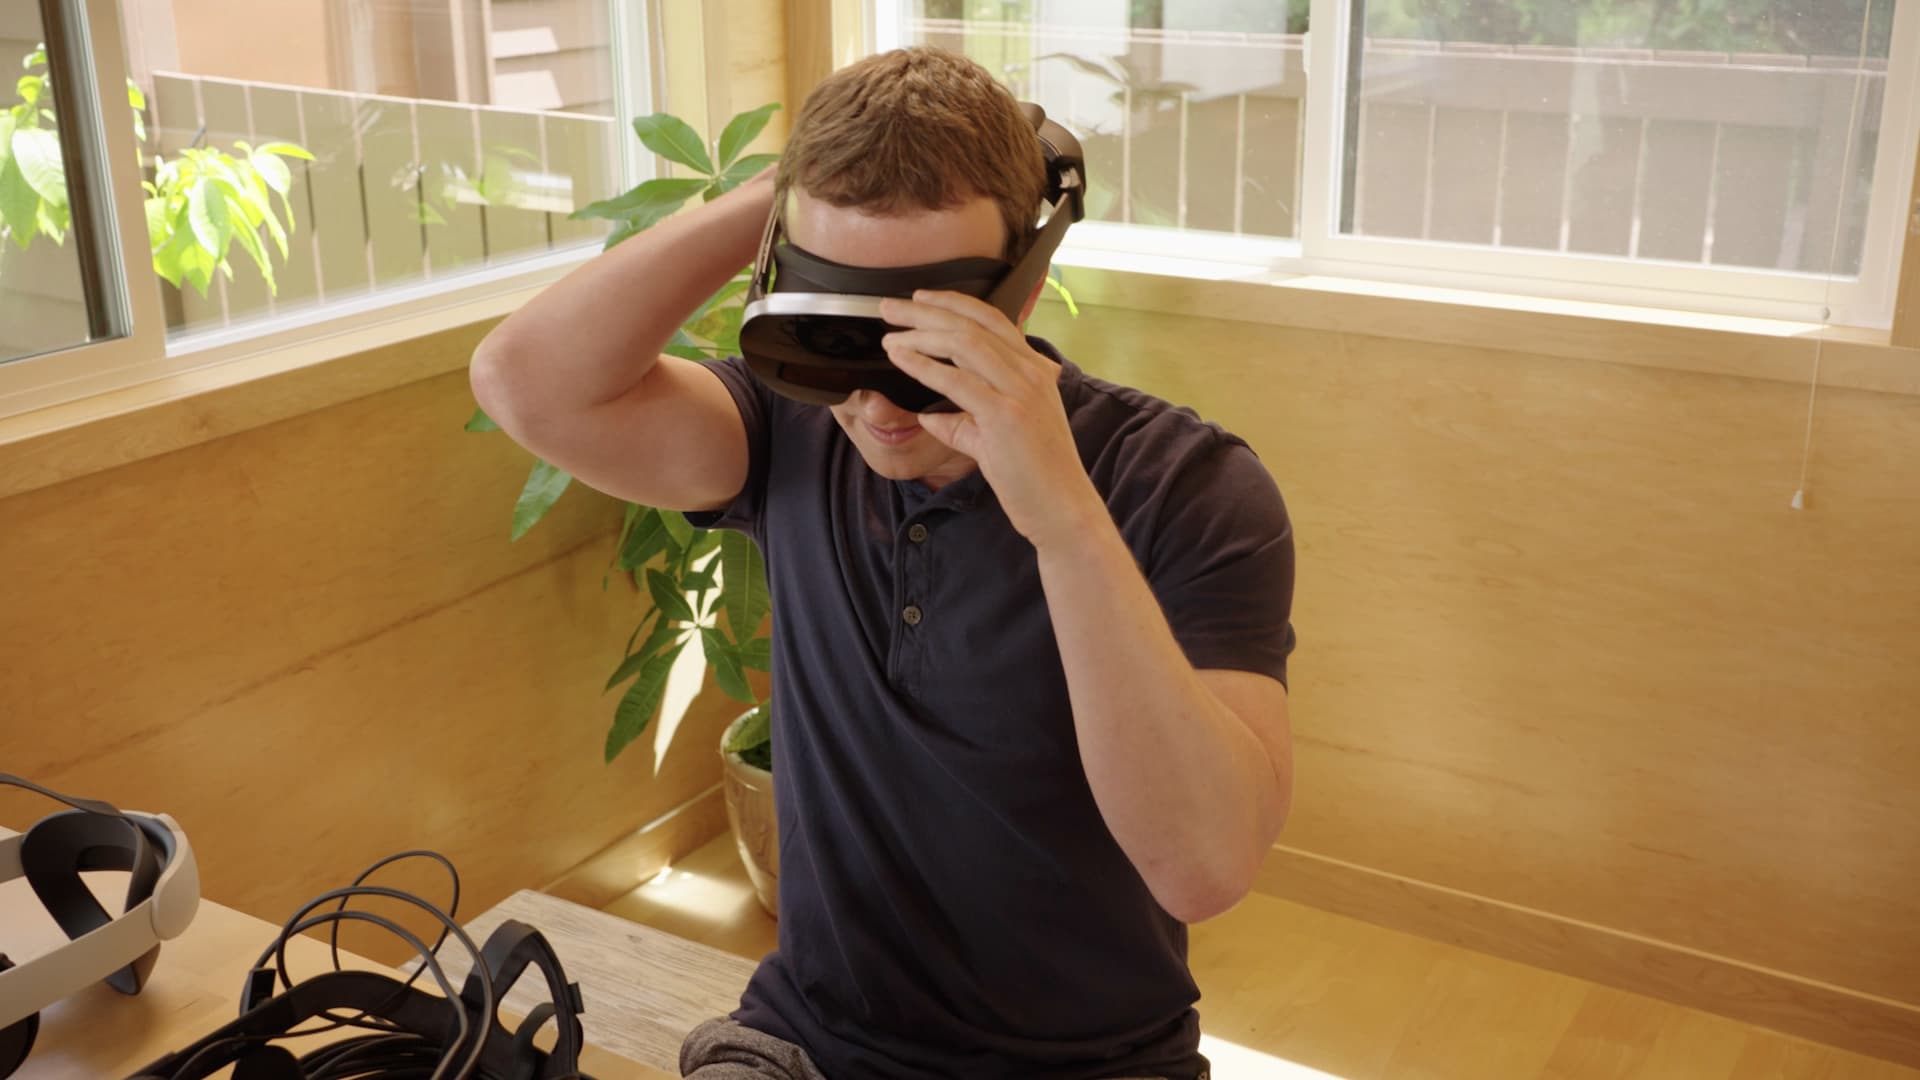 Mark Zuckerberg showed these prototype headsets to build support for his $10 billion metaverse bet